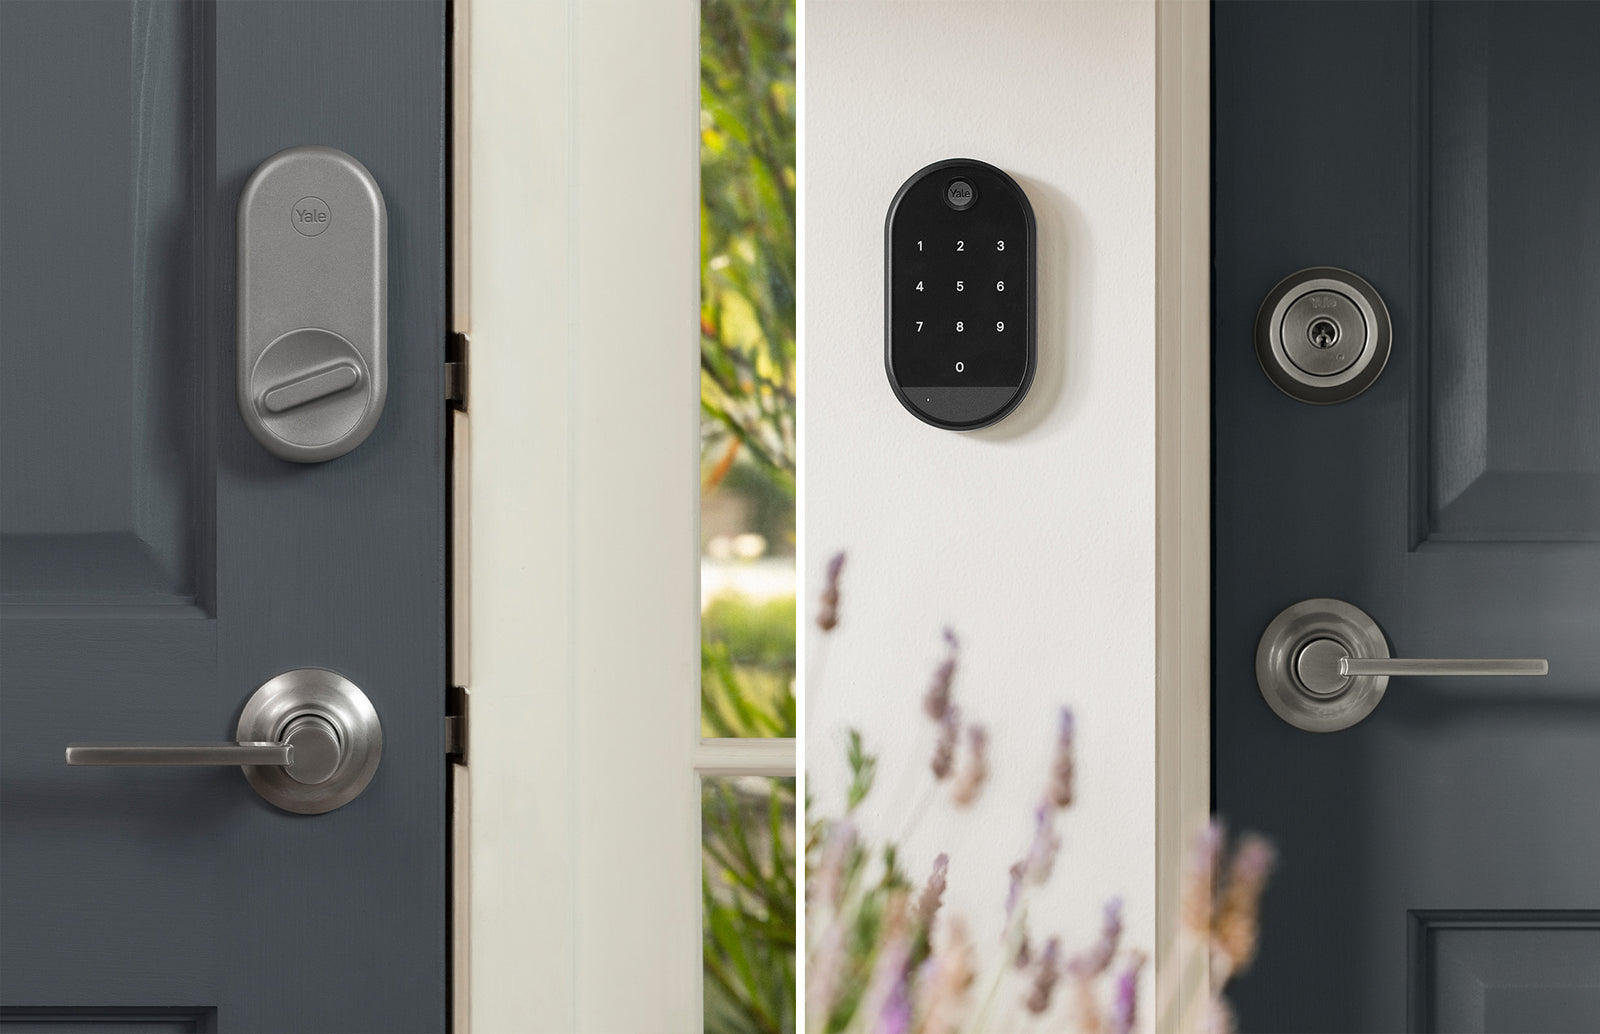 multiple views of the yale keypad and lock